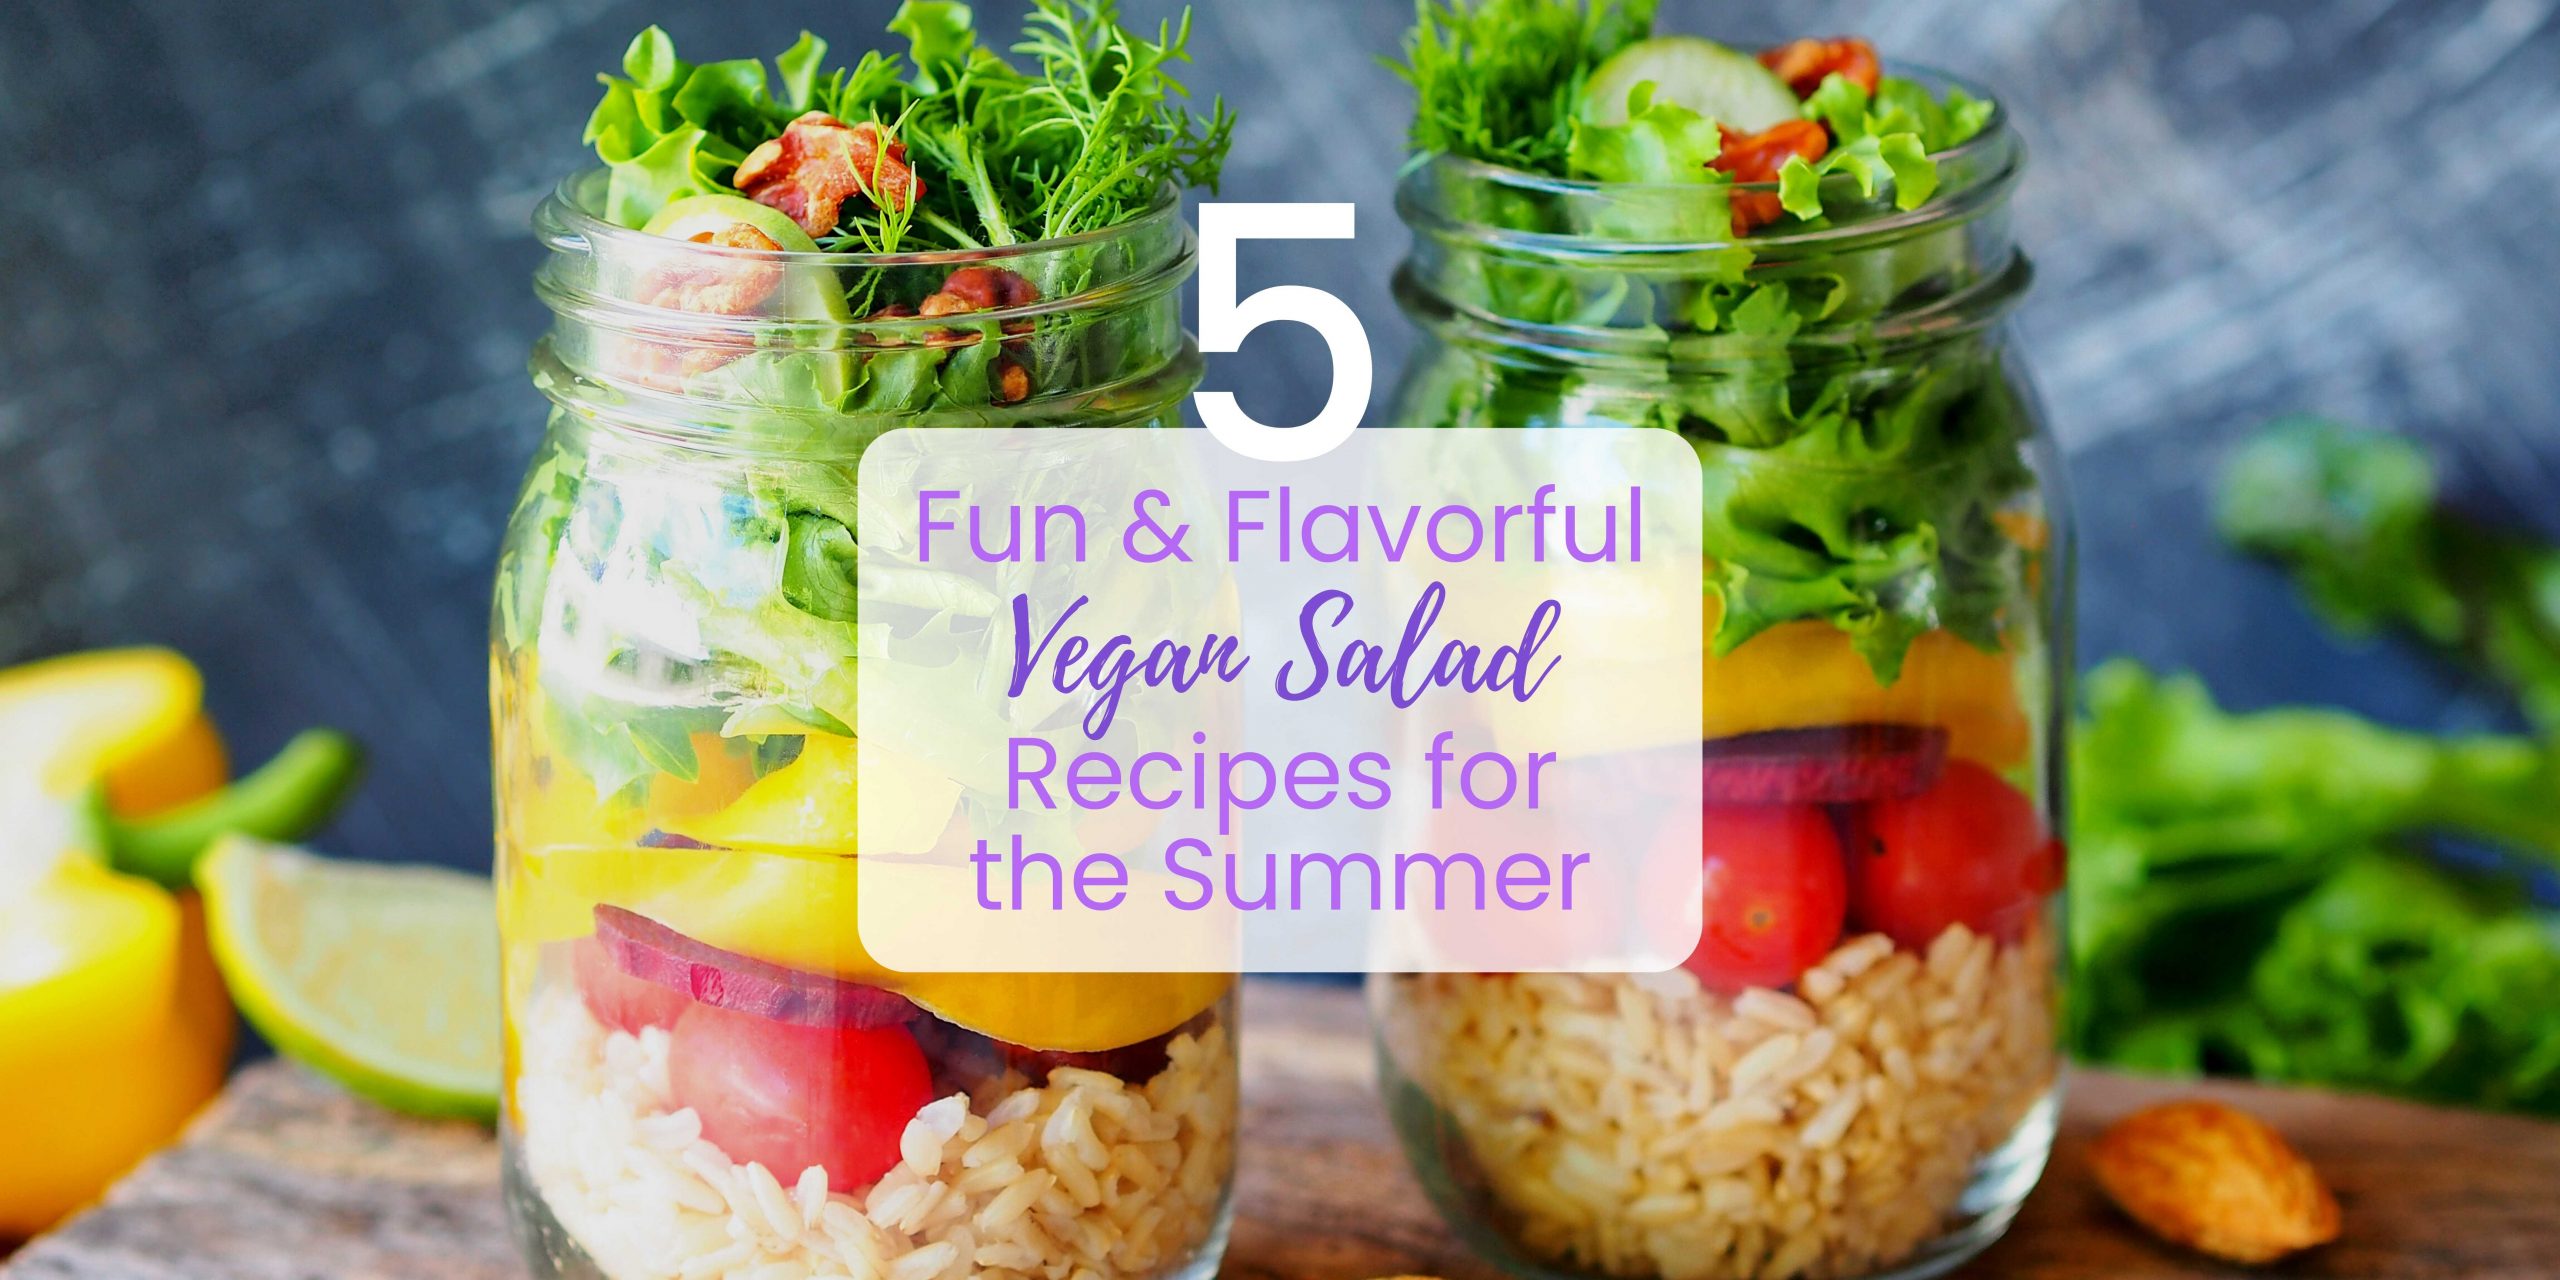 https://www.happycow.net/blog/wp-content/uploads/2022/08/Vegan-Salad-Recipes-for-the-Summer-scaled.jpg